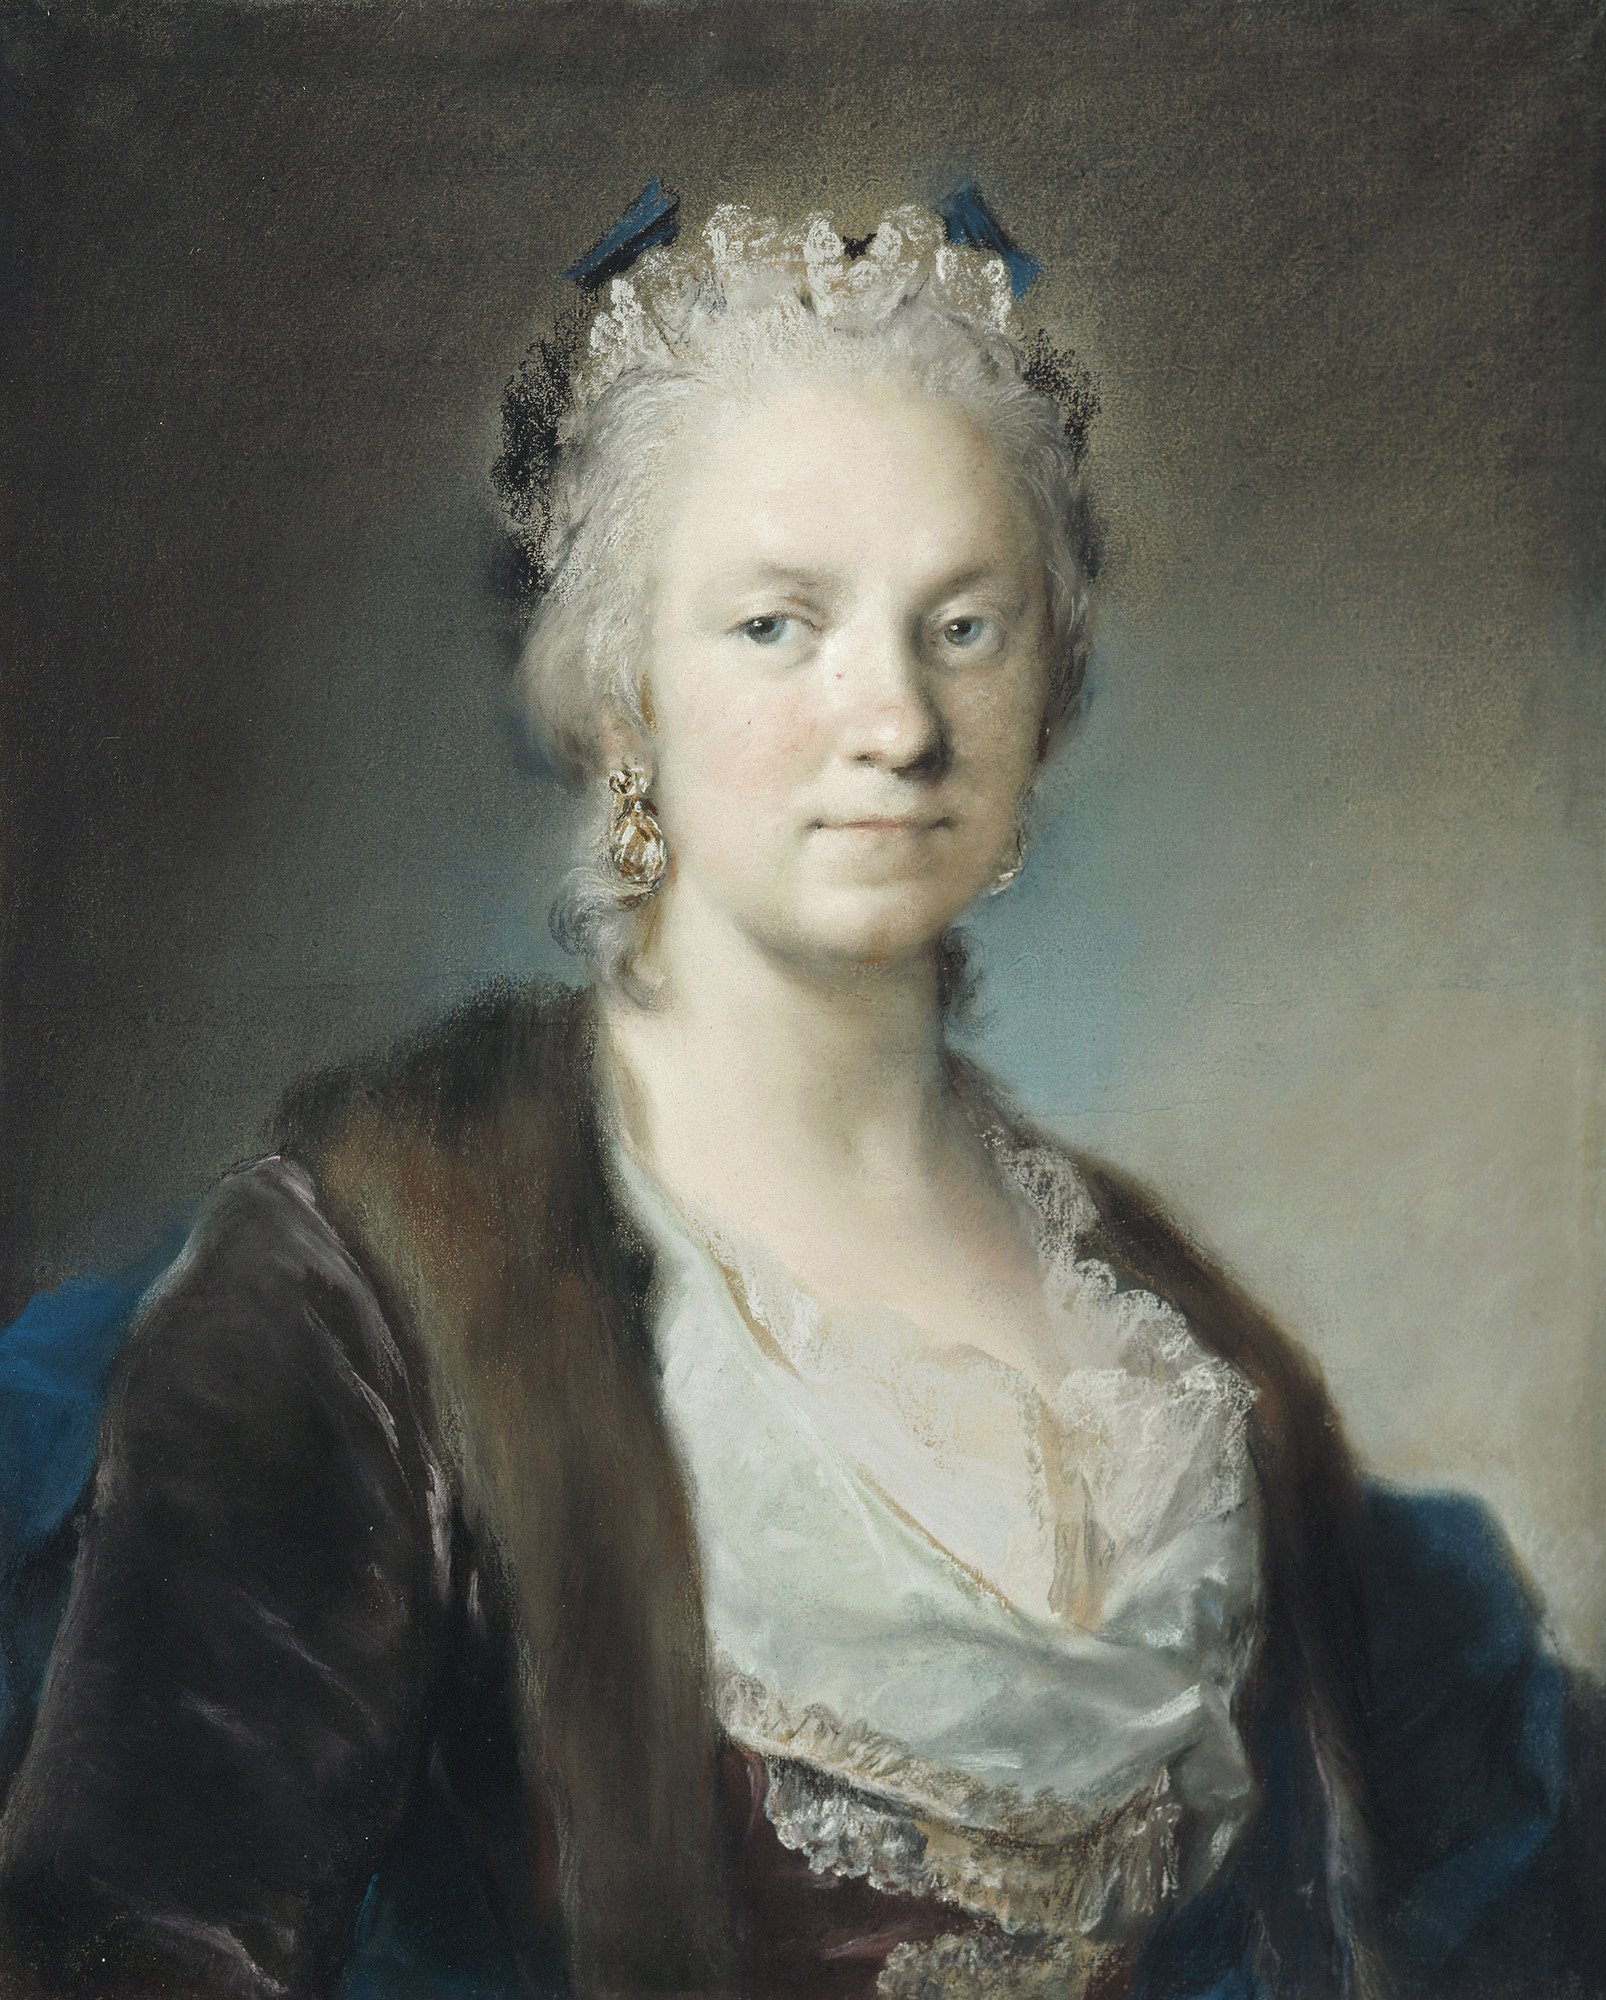 A bust-length portrait of the artist as a middle-aged woman, seated in front of a gray background. She is elegantly dressed in eighteenth-century clothing, including a coat trimmed with fur, large earrings, and bows in her hair. She looks out, away from the viewer, with a slight smile.